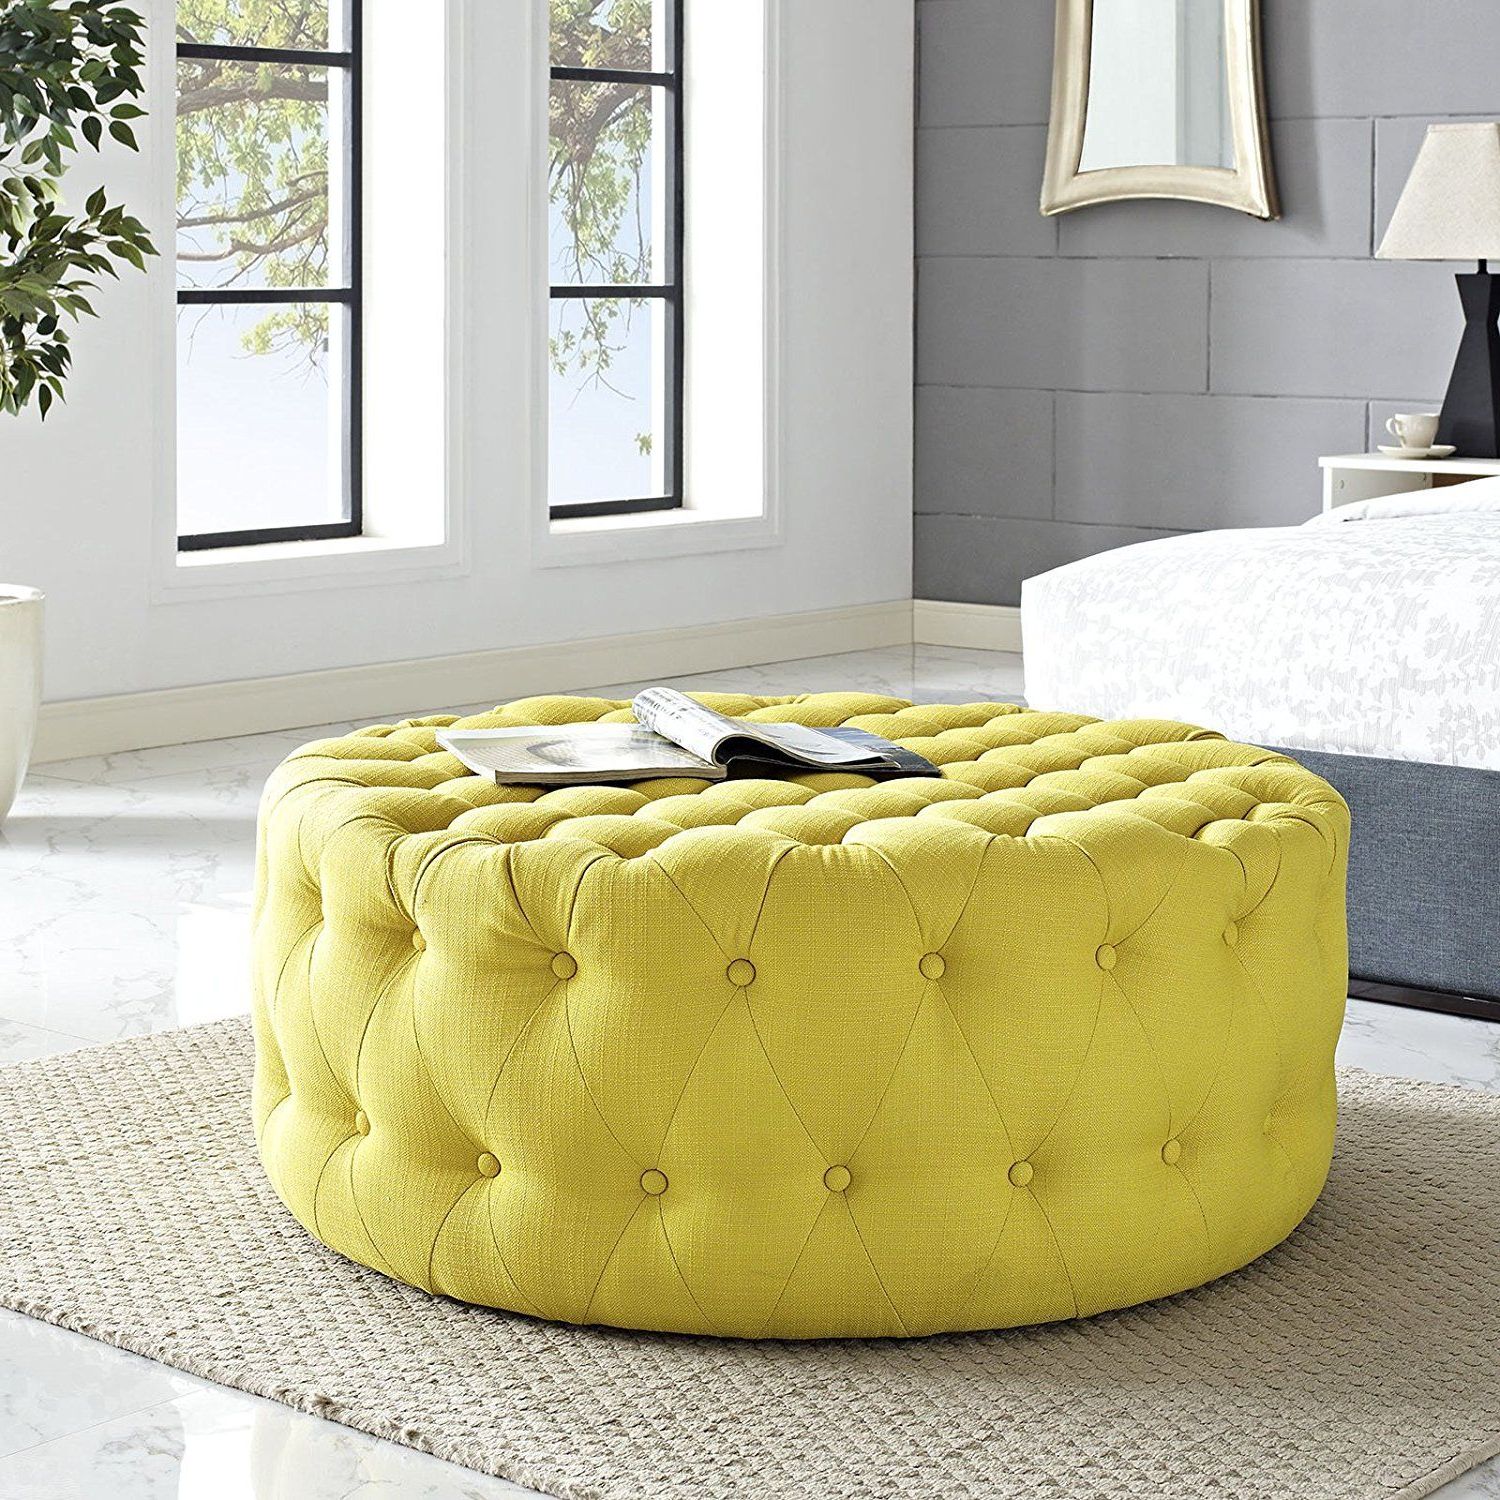 Round Tufted Ottoman For Best And Newest Multi Color Fabric Storage Ottomans (View 10 of 10)